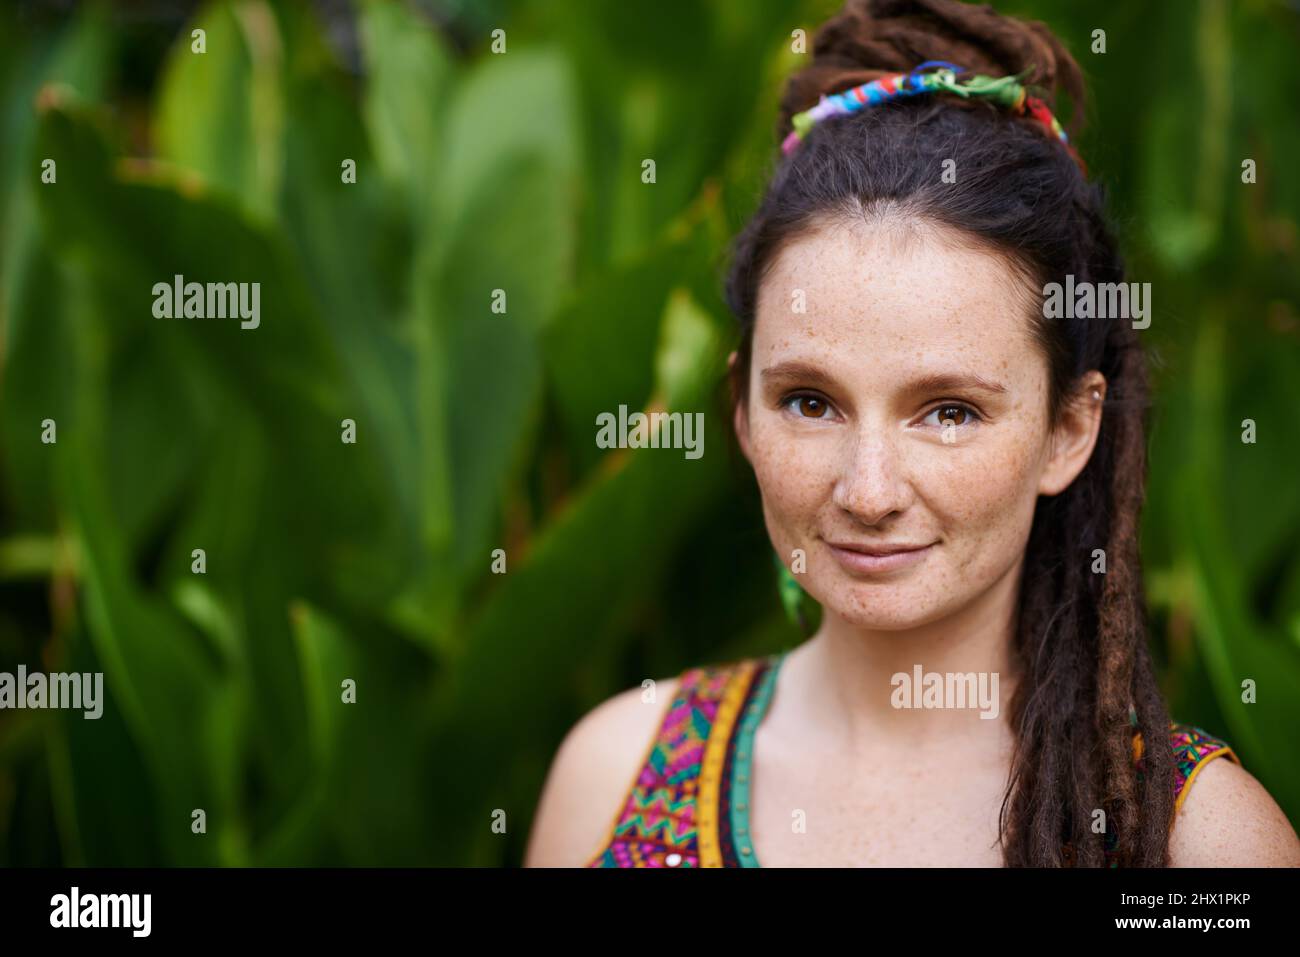 Living life her way. Portrait of a young hippie woman outdoors. Stock Photo